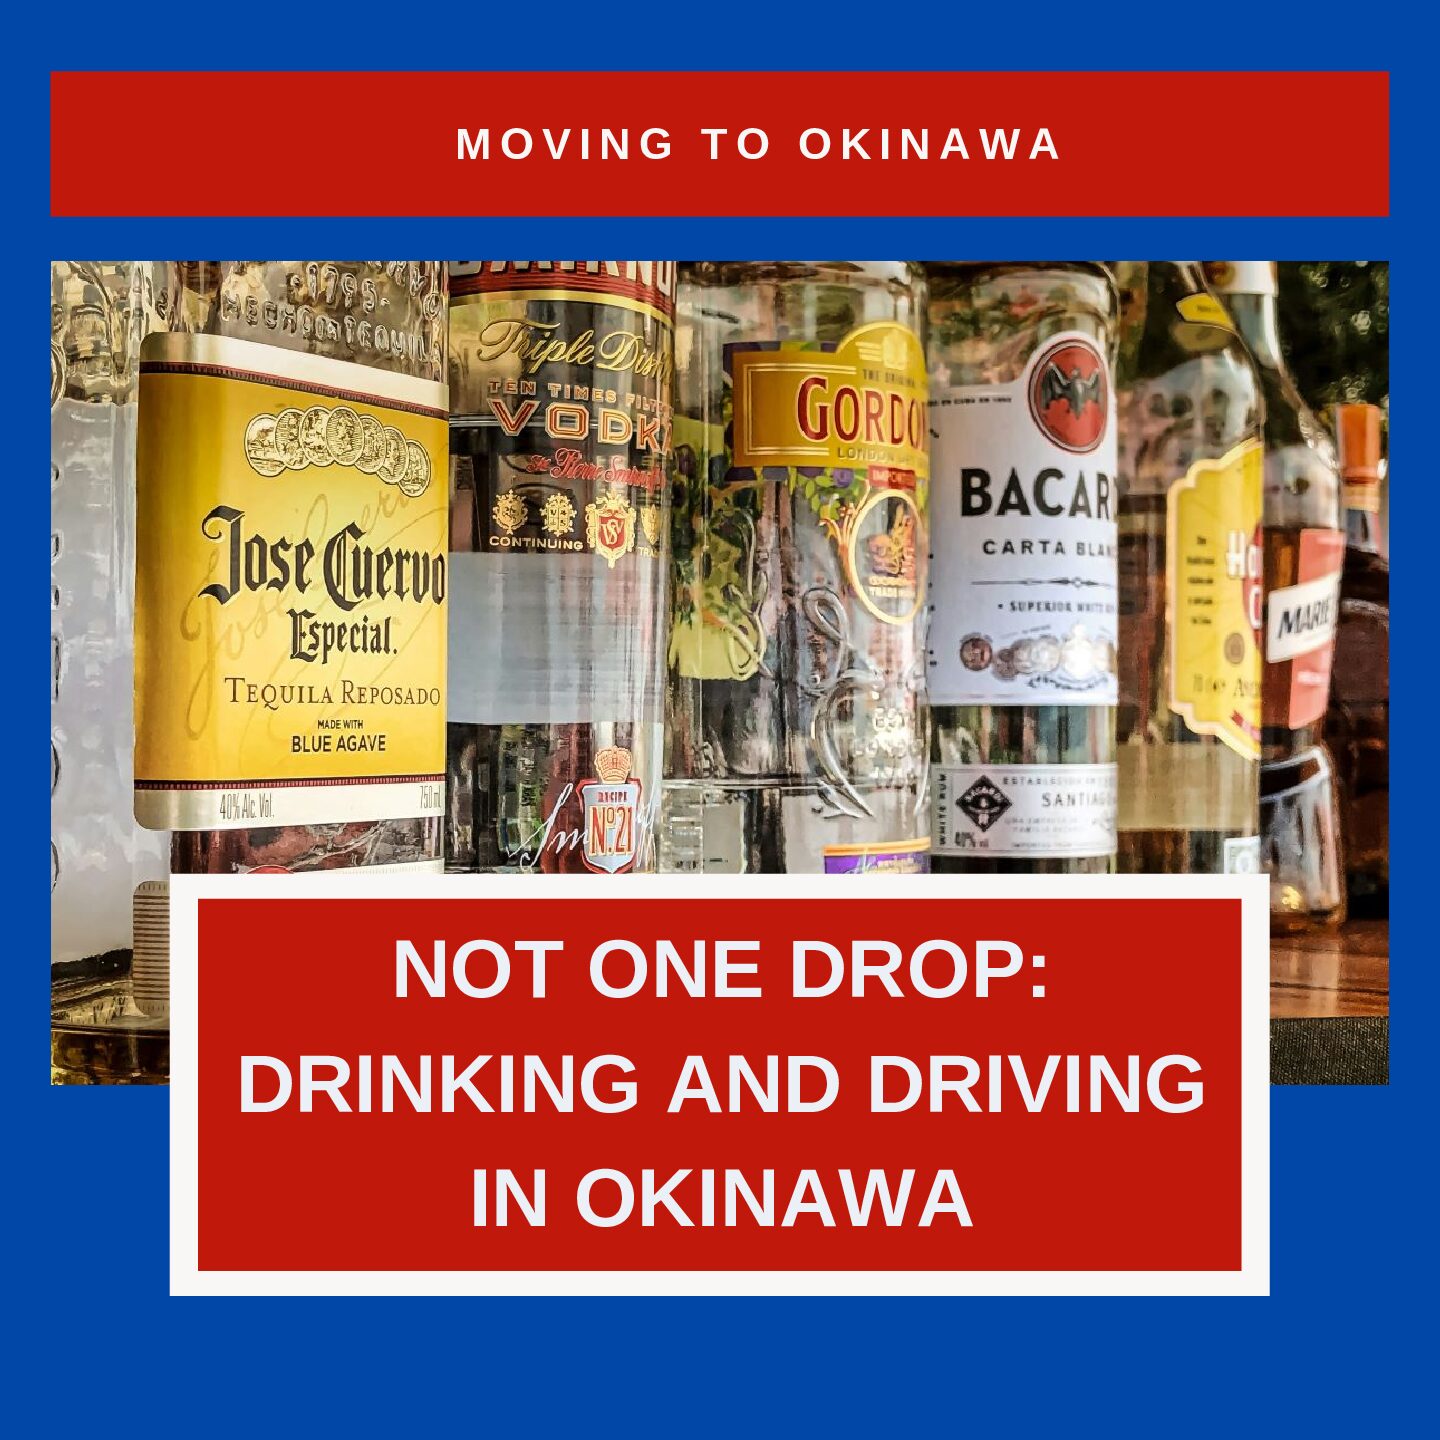 Not 1 Drop? – The Unique Laws of Drinking and Driving in Okinawa